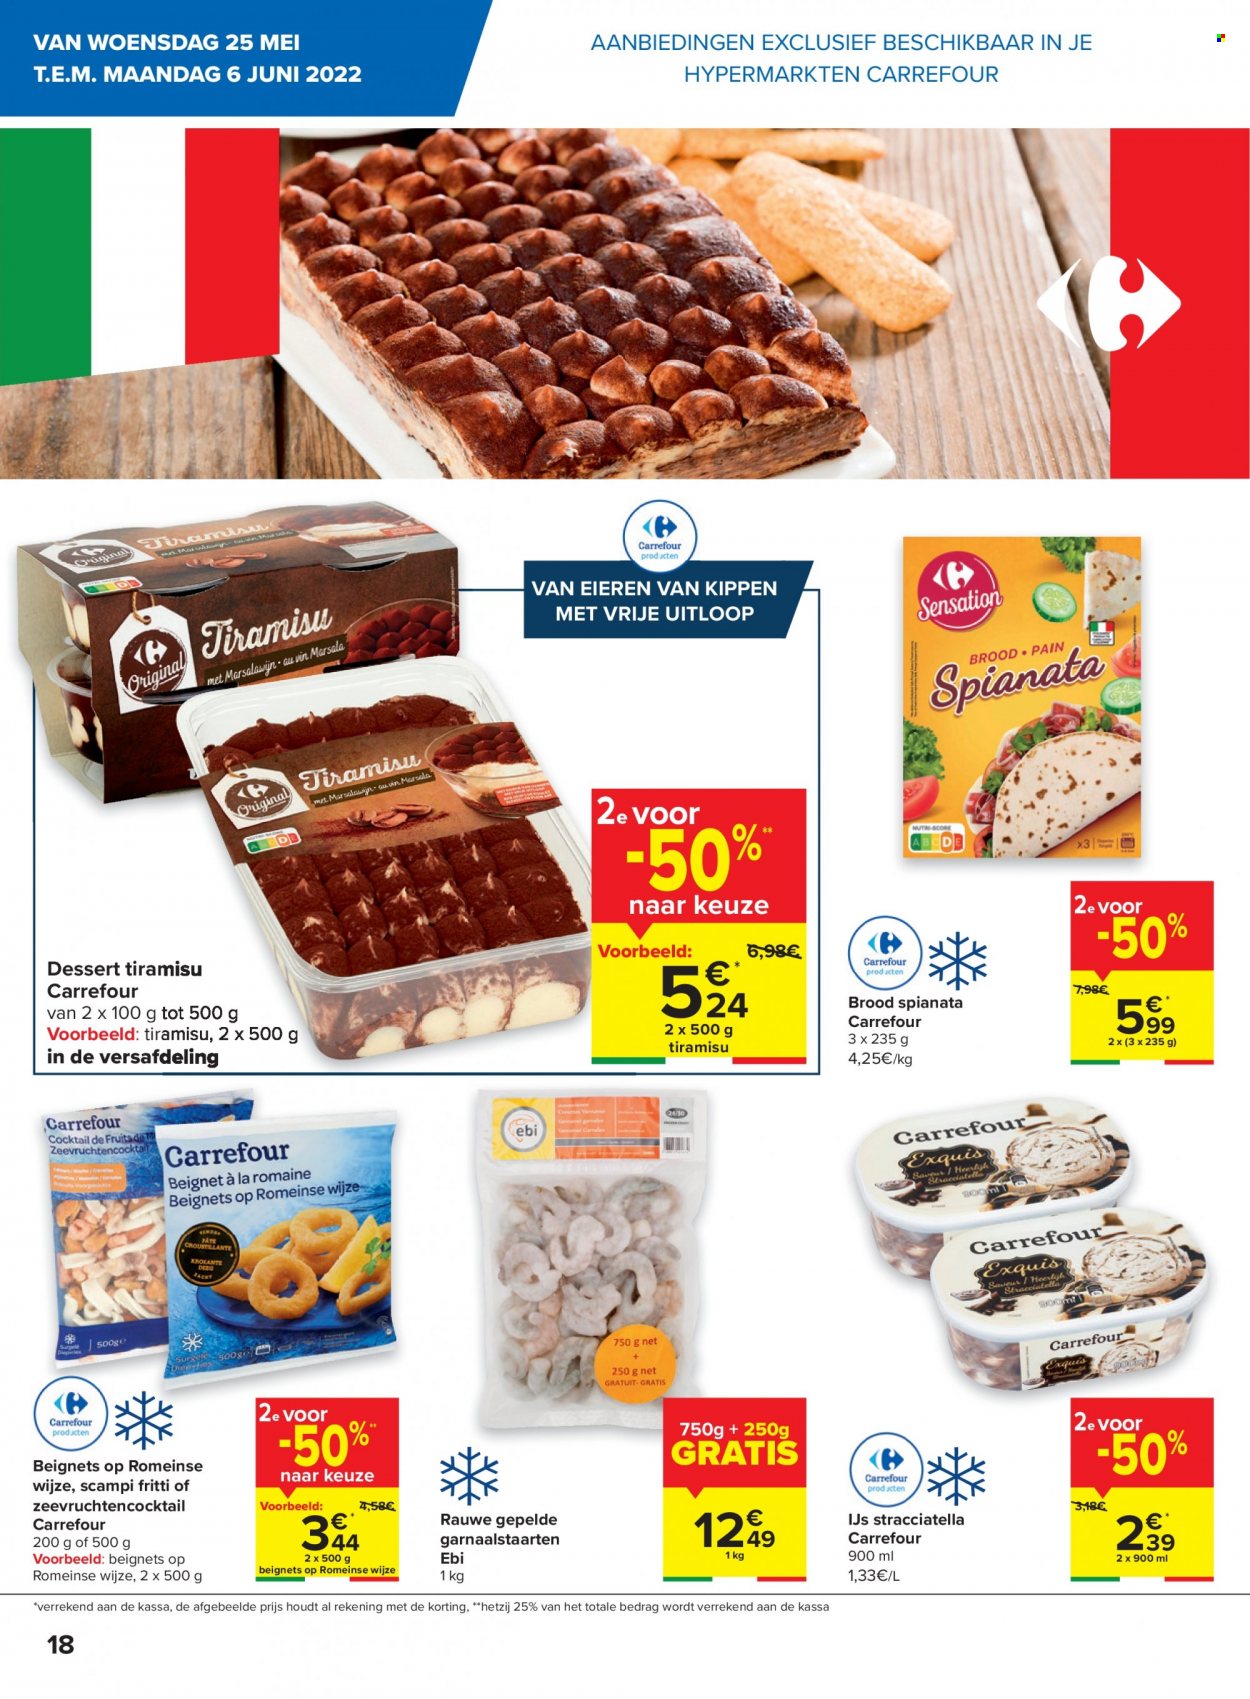 Catalogue Carrefour hypermarkt - 24.5.2022 - 30.5.2022. Page 18.